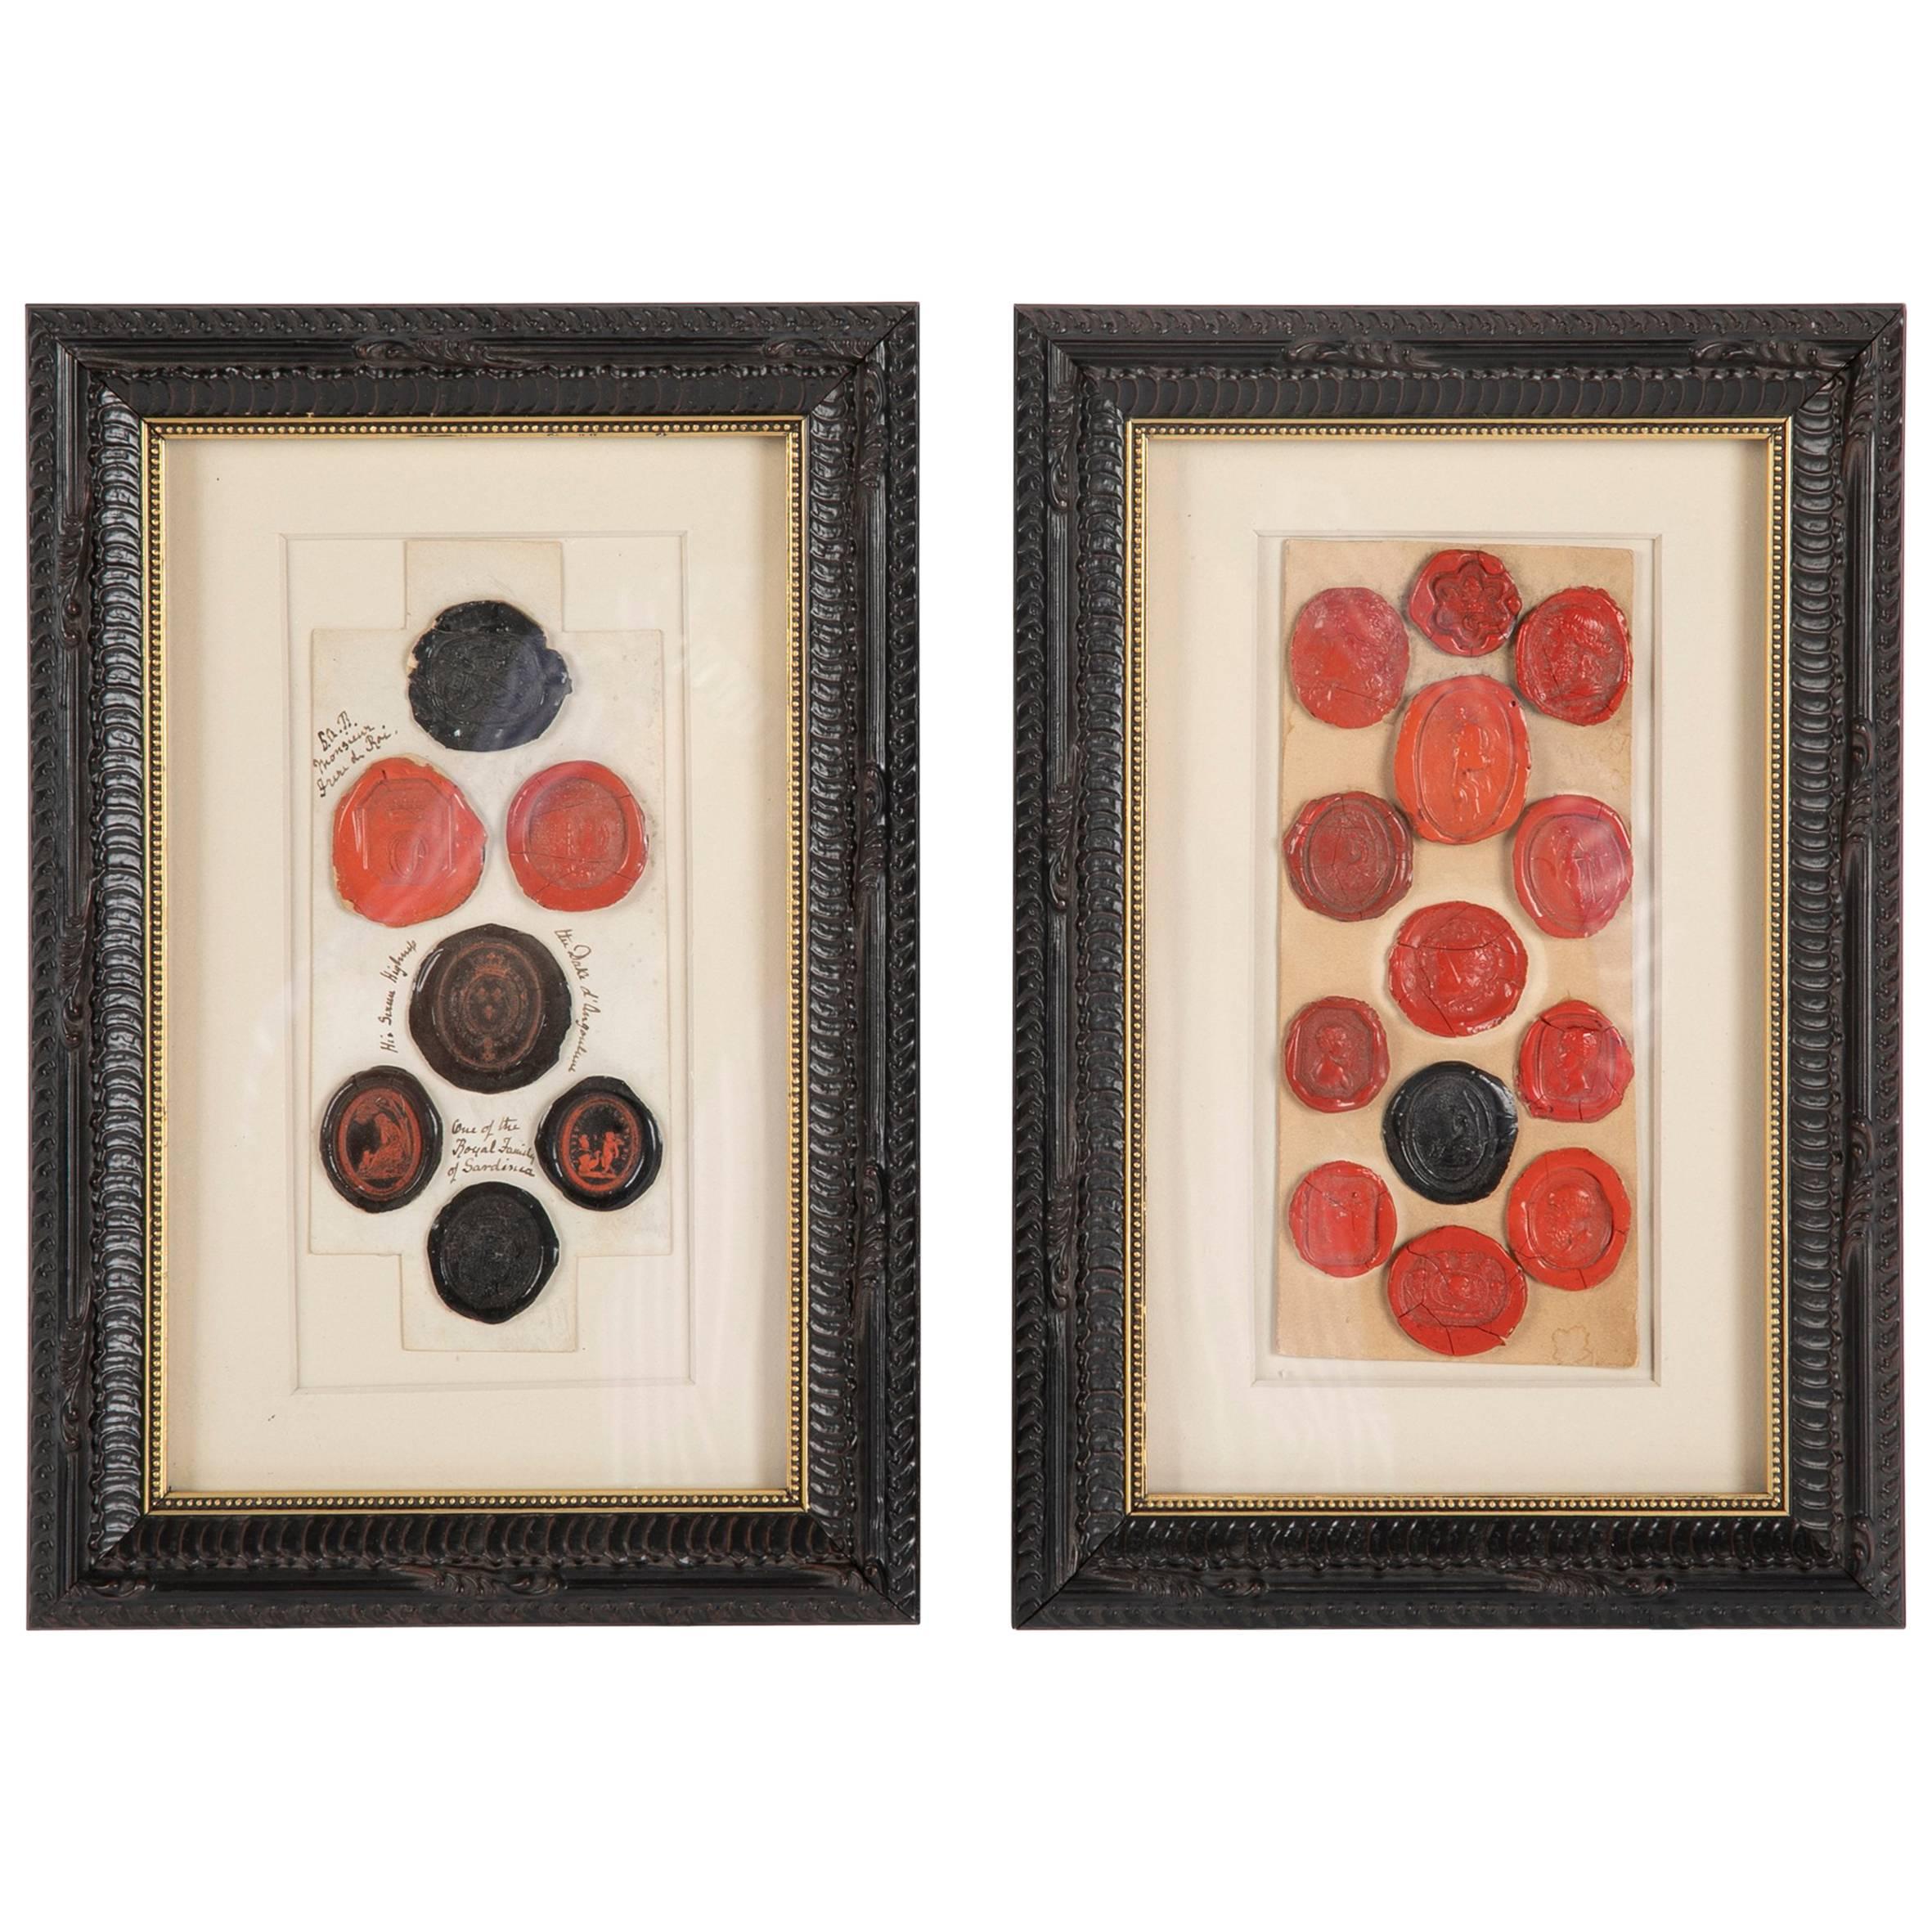 Pair of Framed Red and Black Wax Intaglio Seals